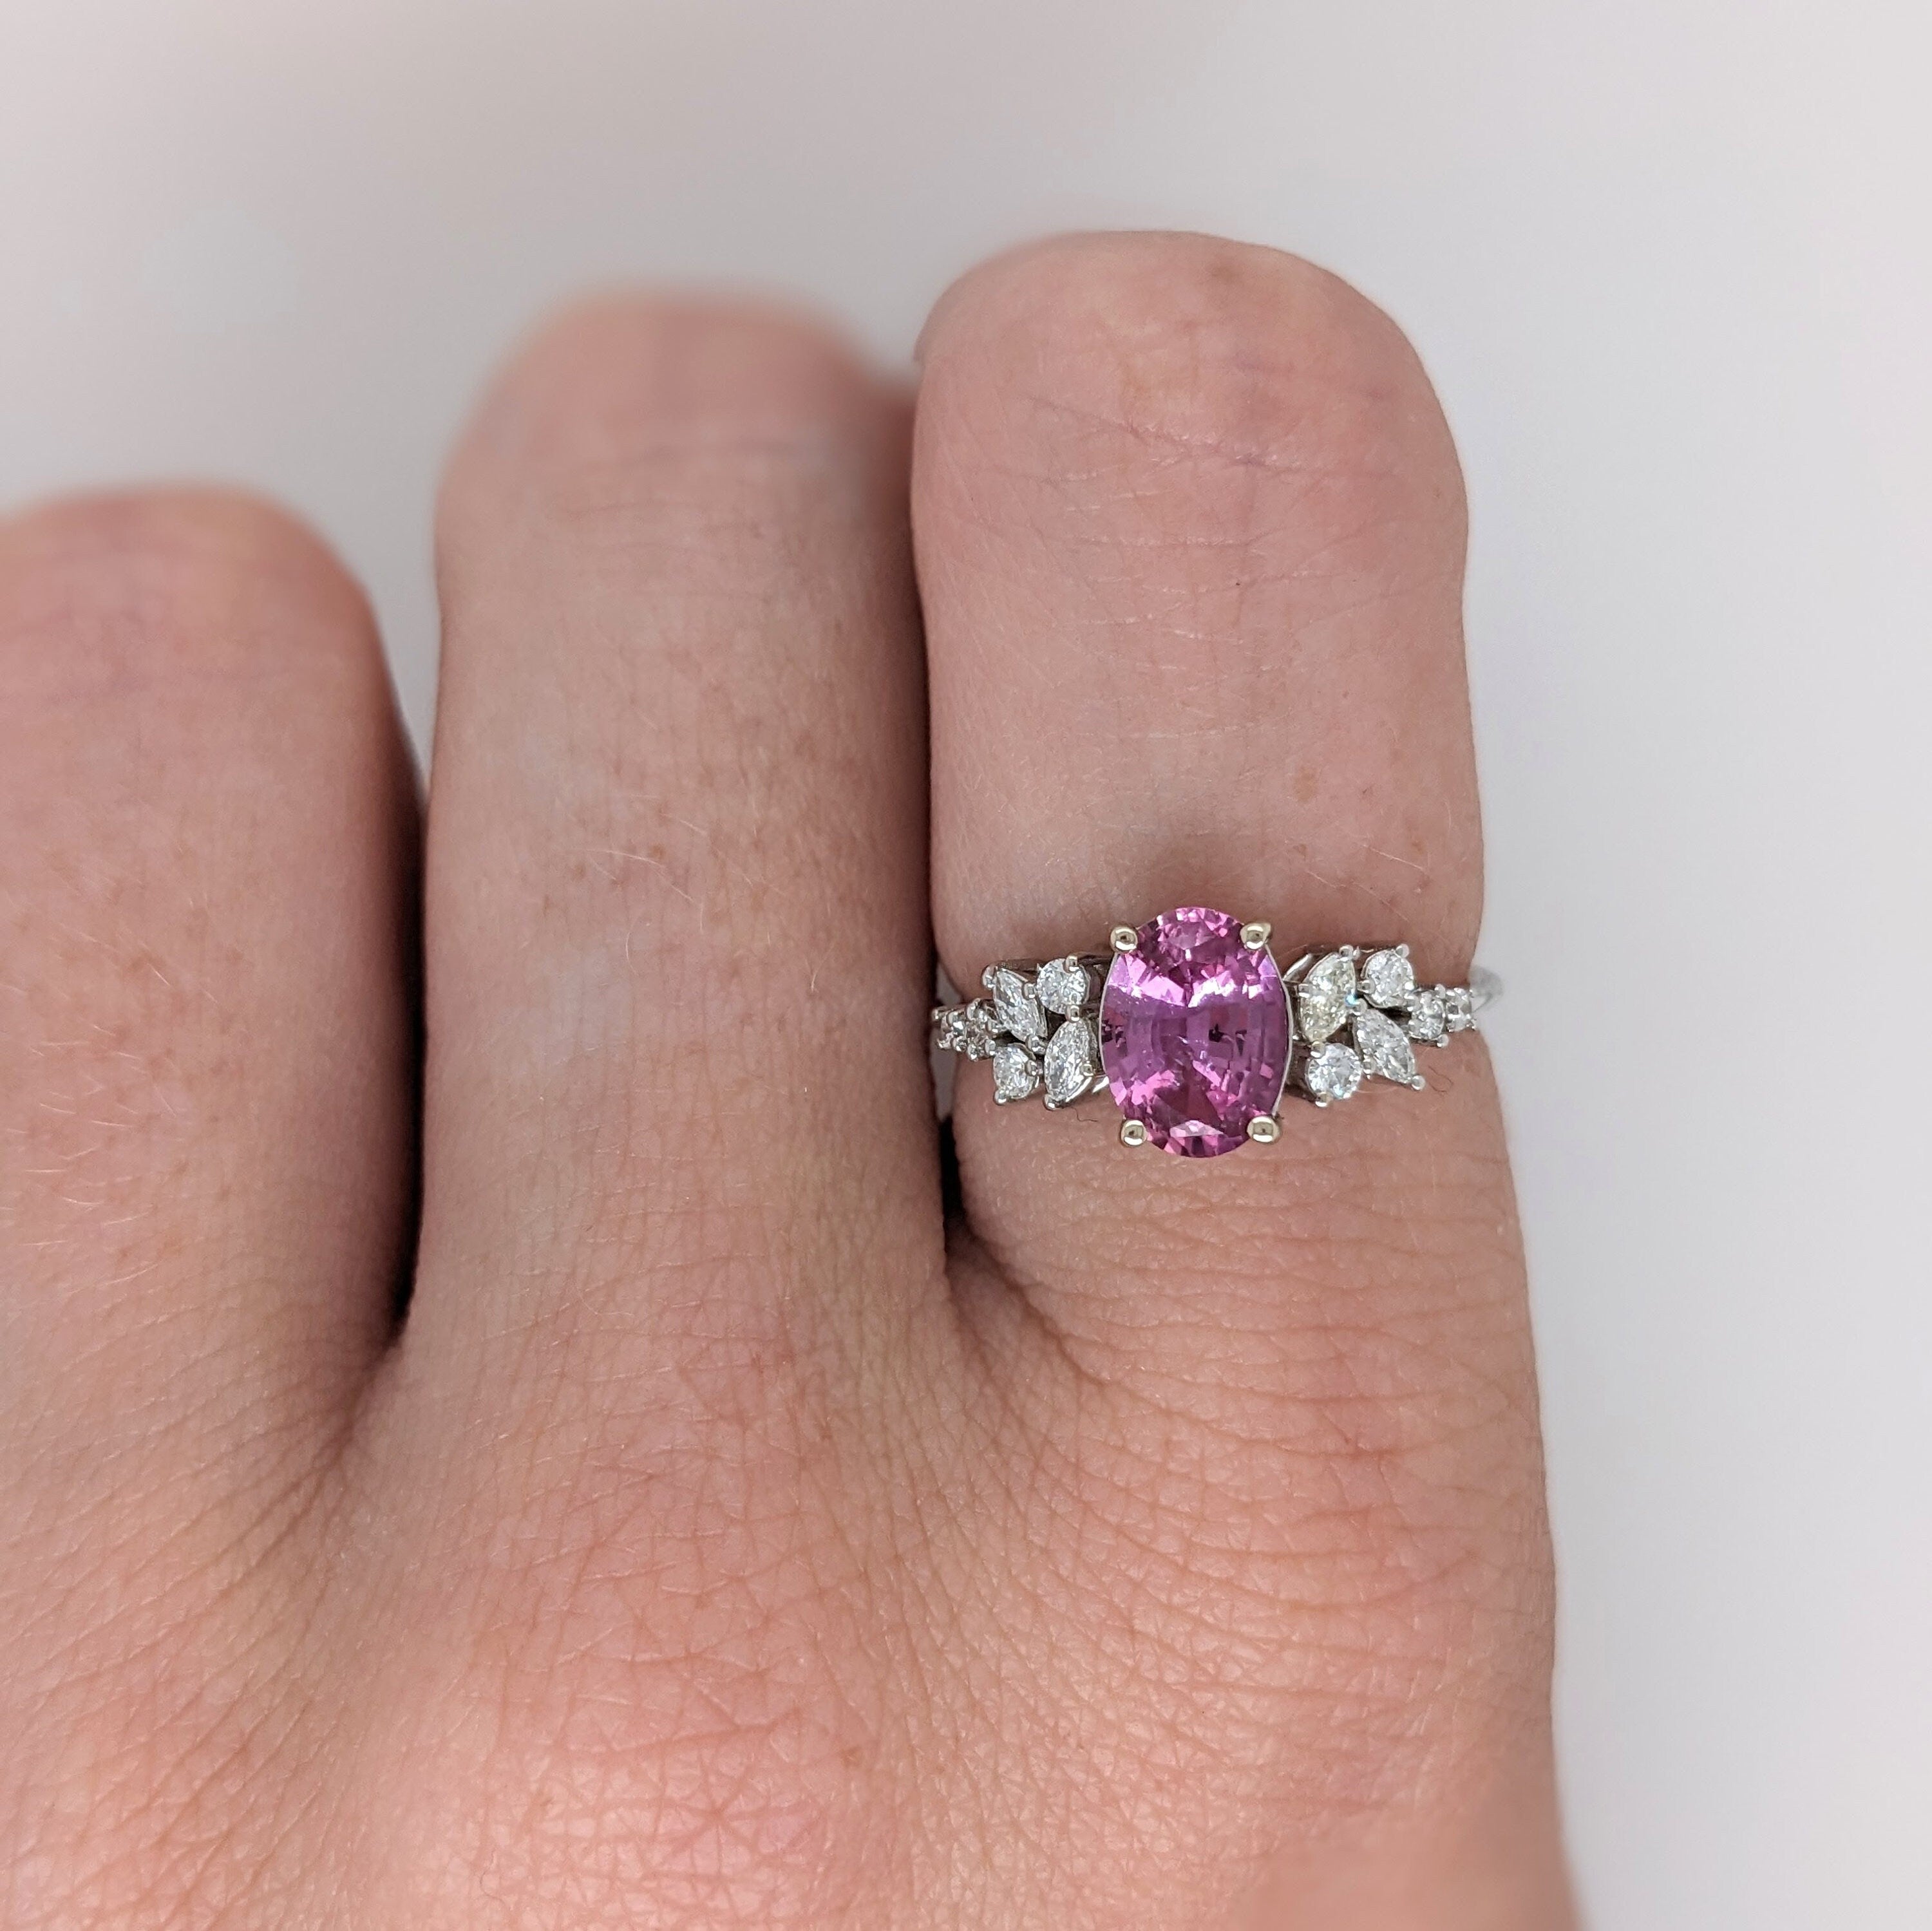 Natural Pink Sapphire Ring w Diamond Accents in Solid 14k White Gold | Oval 8x6mm | September Birthstone | Pink Gemstone | Engagement Ring